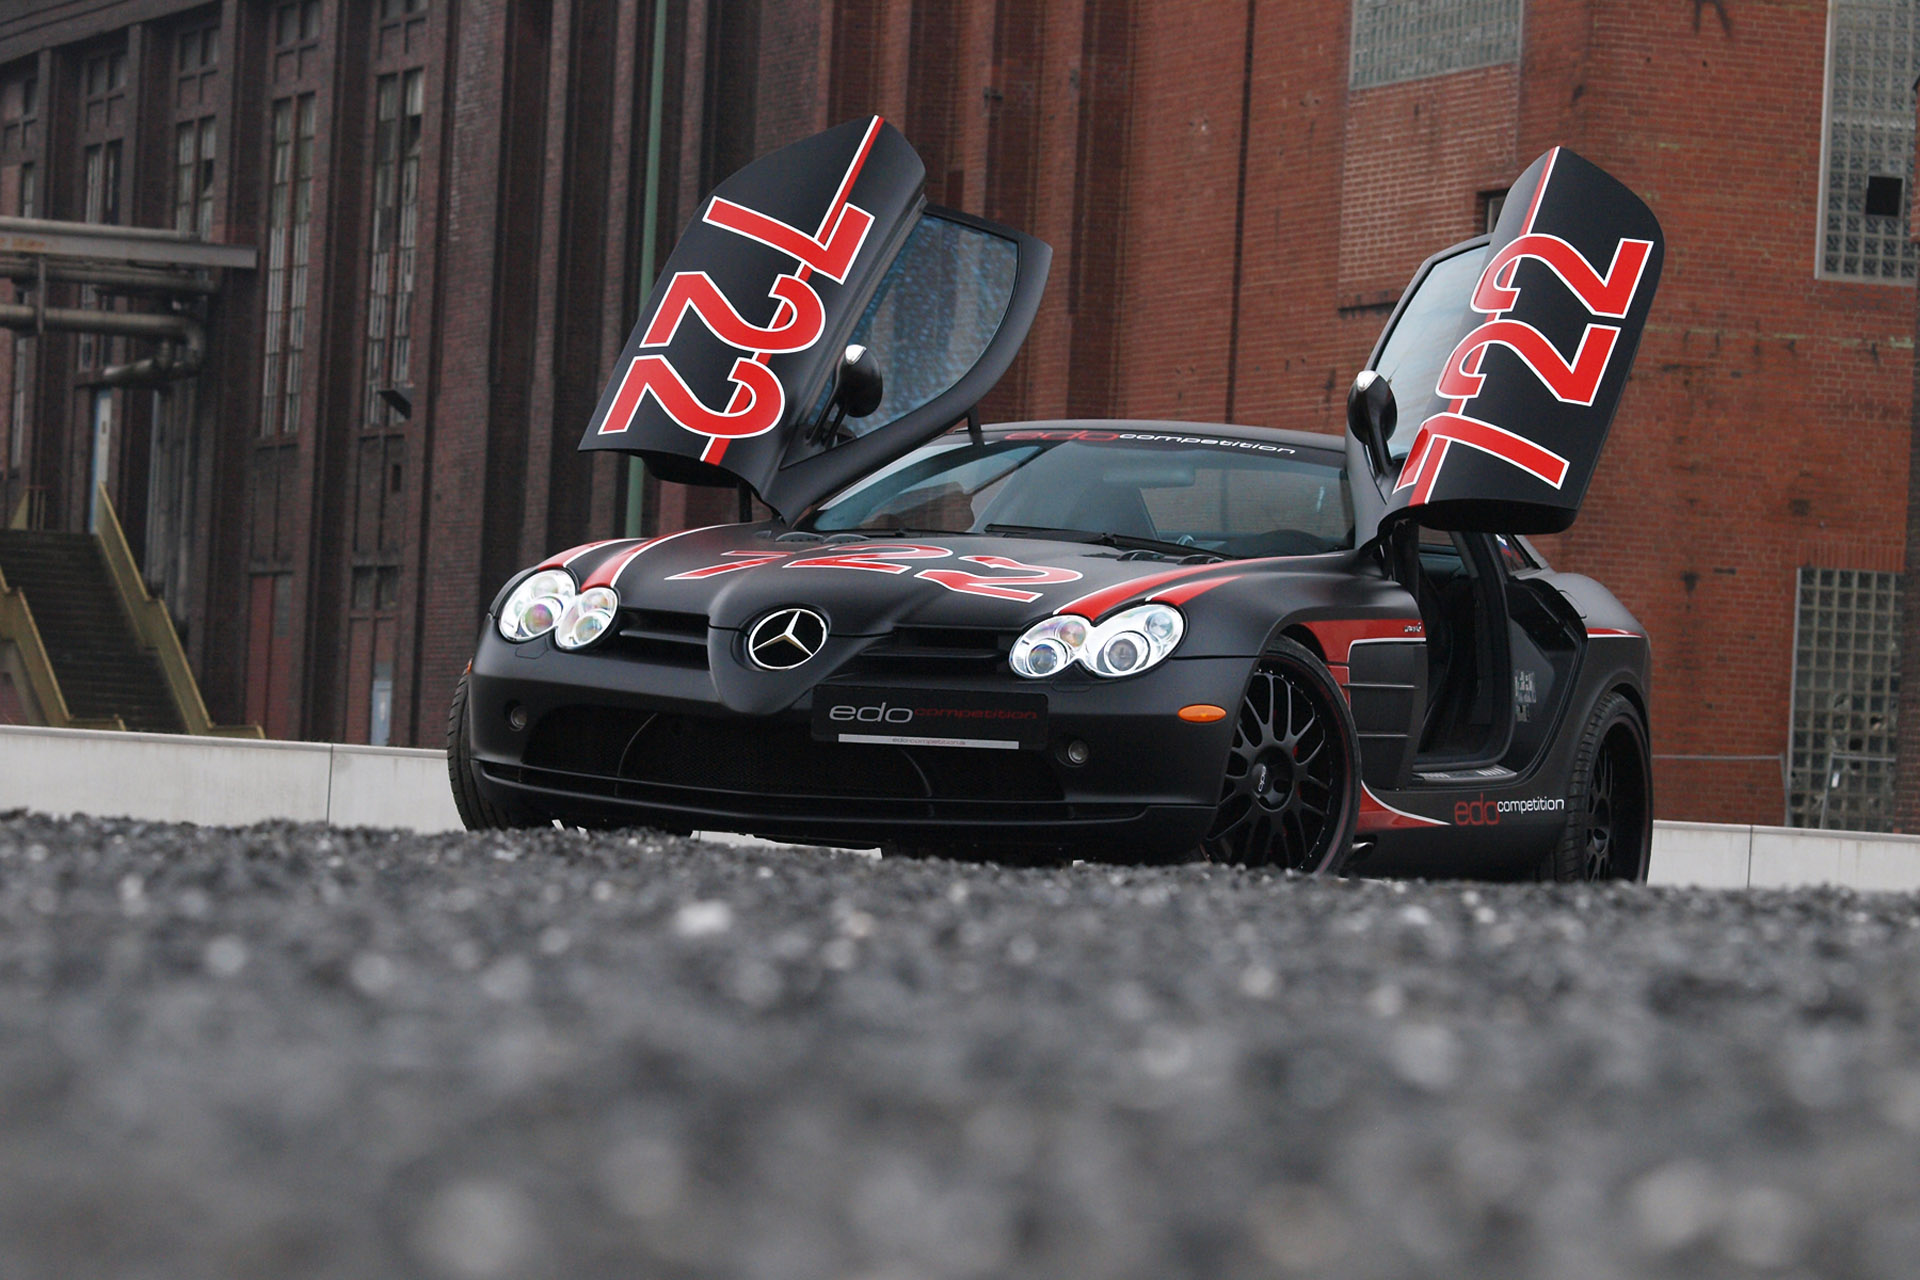 2011, Edo competition, Mercedes, Benz, Slr, Tuning Wallpaper